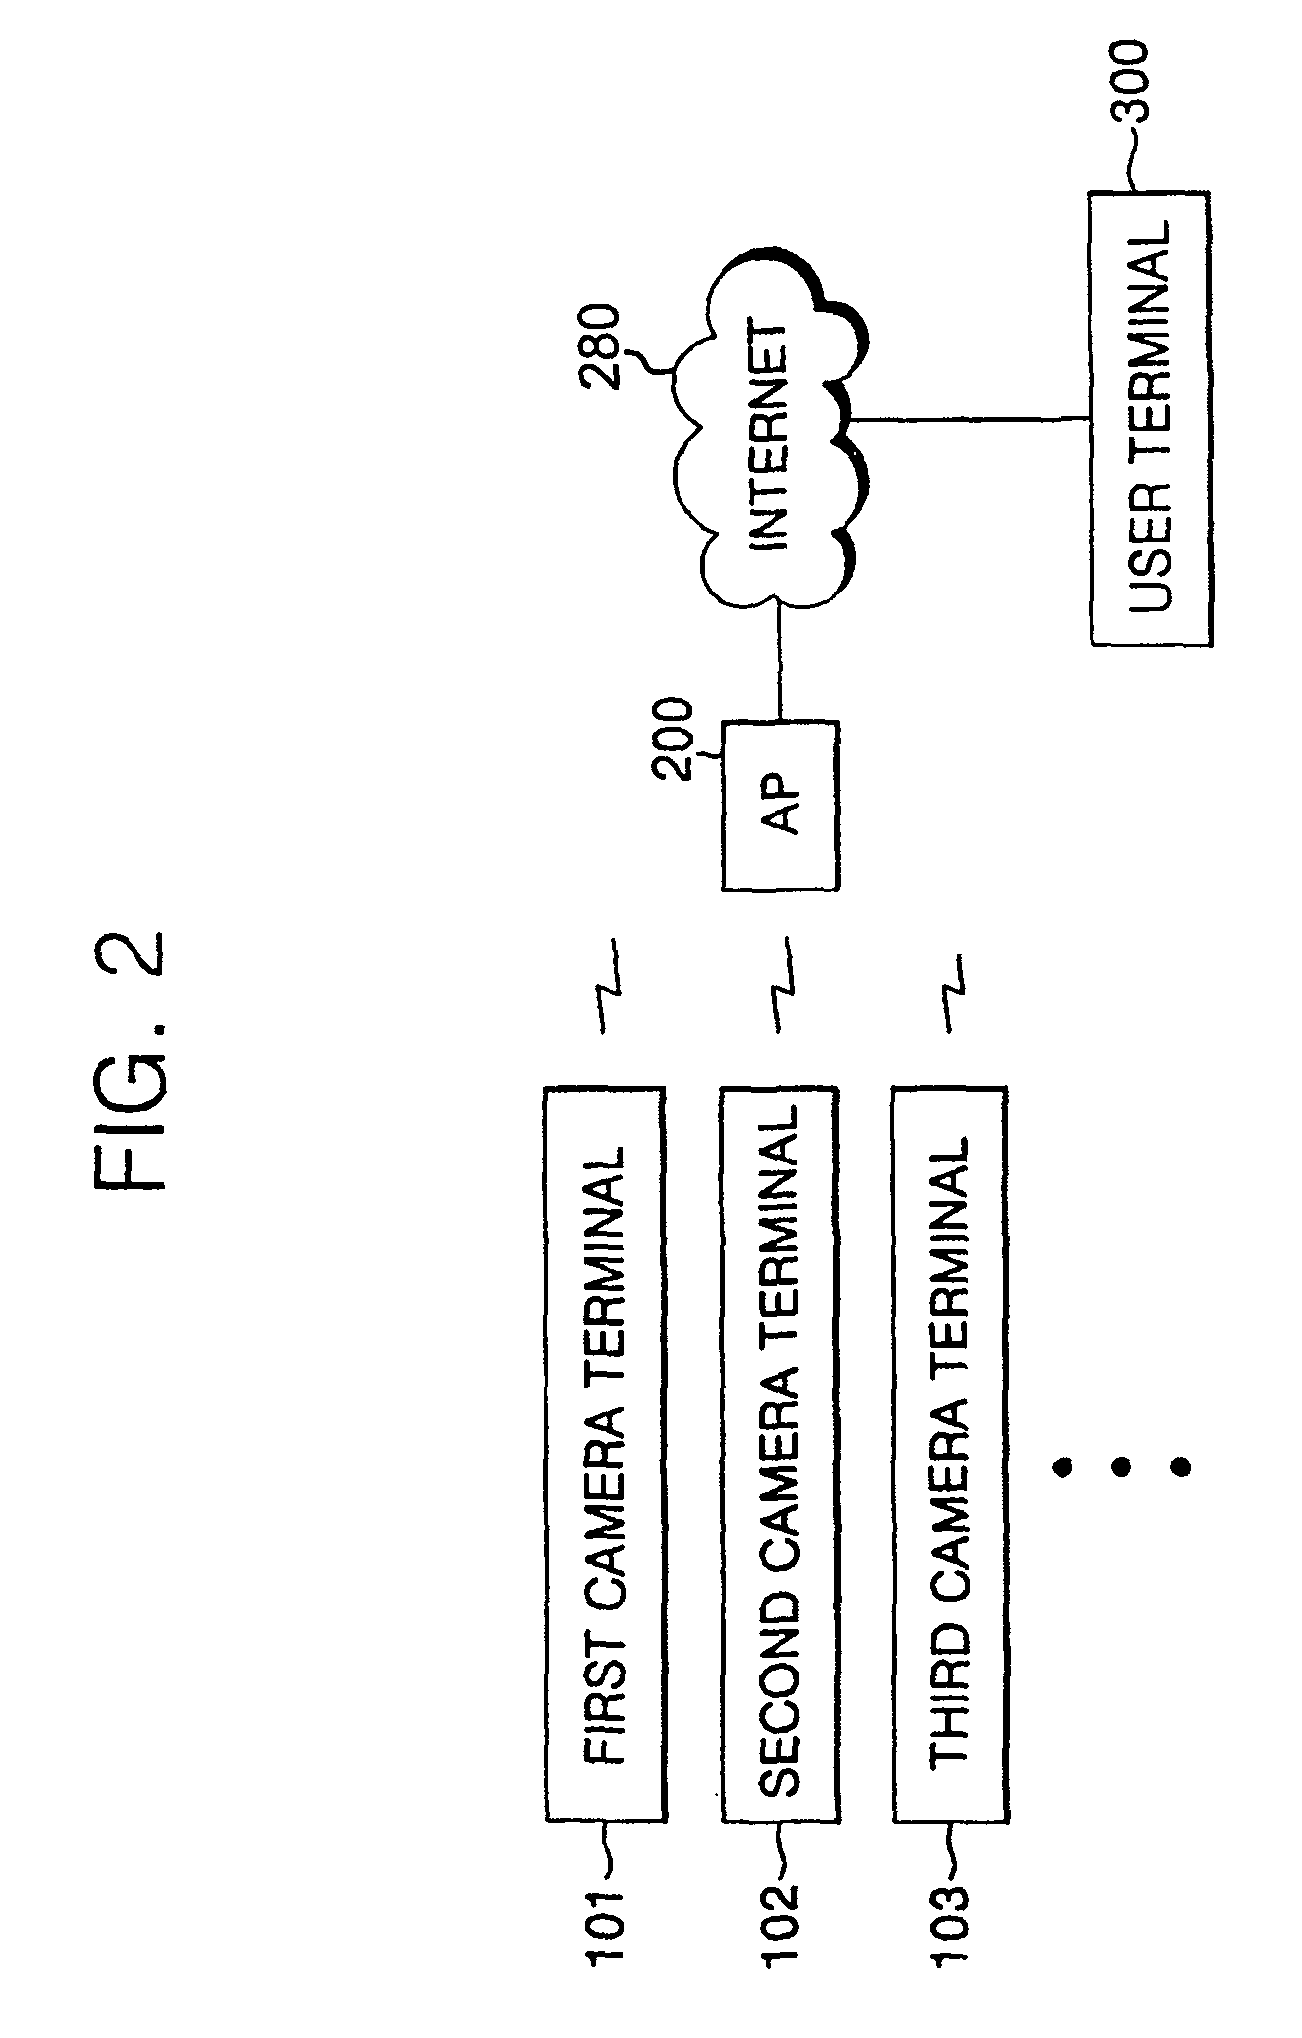 Port forwarding configuration system and method for wire and wireless networks